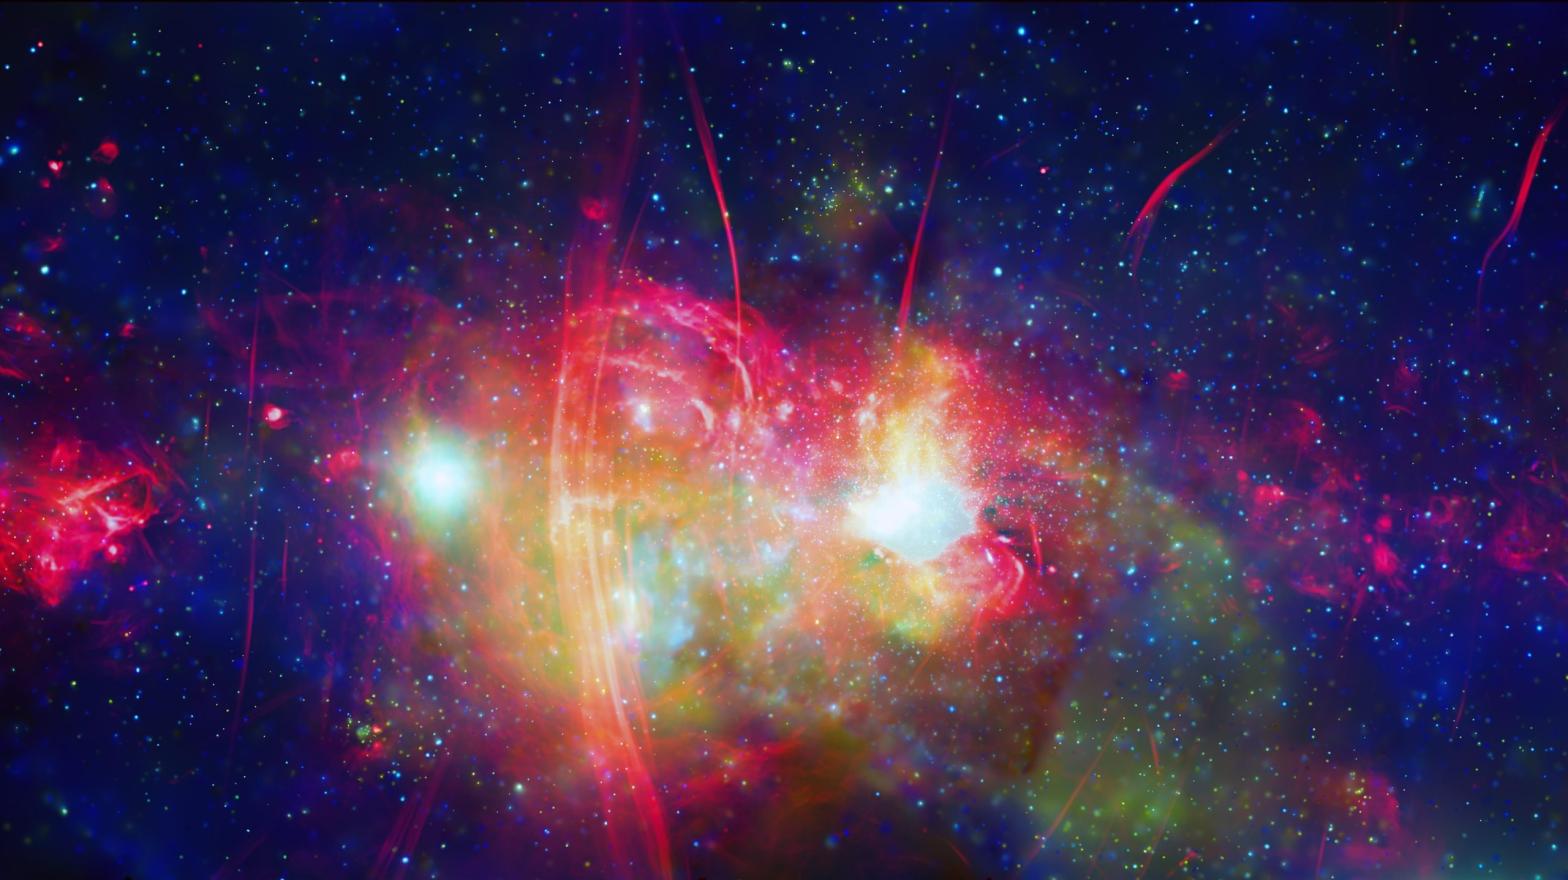 A view of the galactic centre — a region of space containing an abundance of stars, superheated clouds of gas, neutron stars, white dwarfs, and a supermassive black hole parked in the core.  (Image: X-Ray:NASA/CXC/UMass/D. Wang et al.; Radio:NRF/SARAO/MeerKAT)